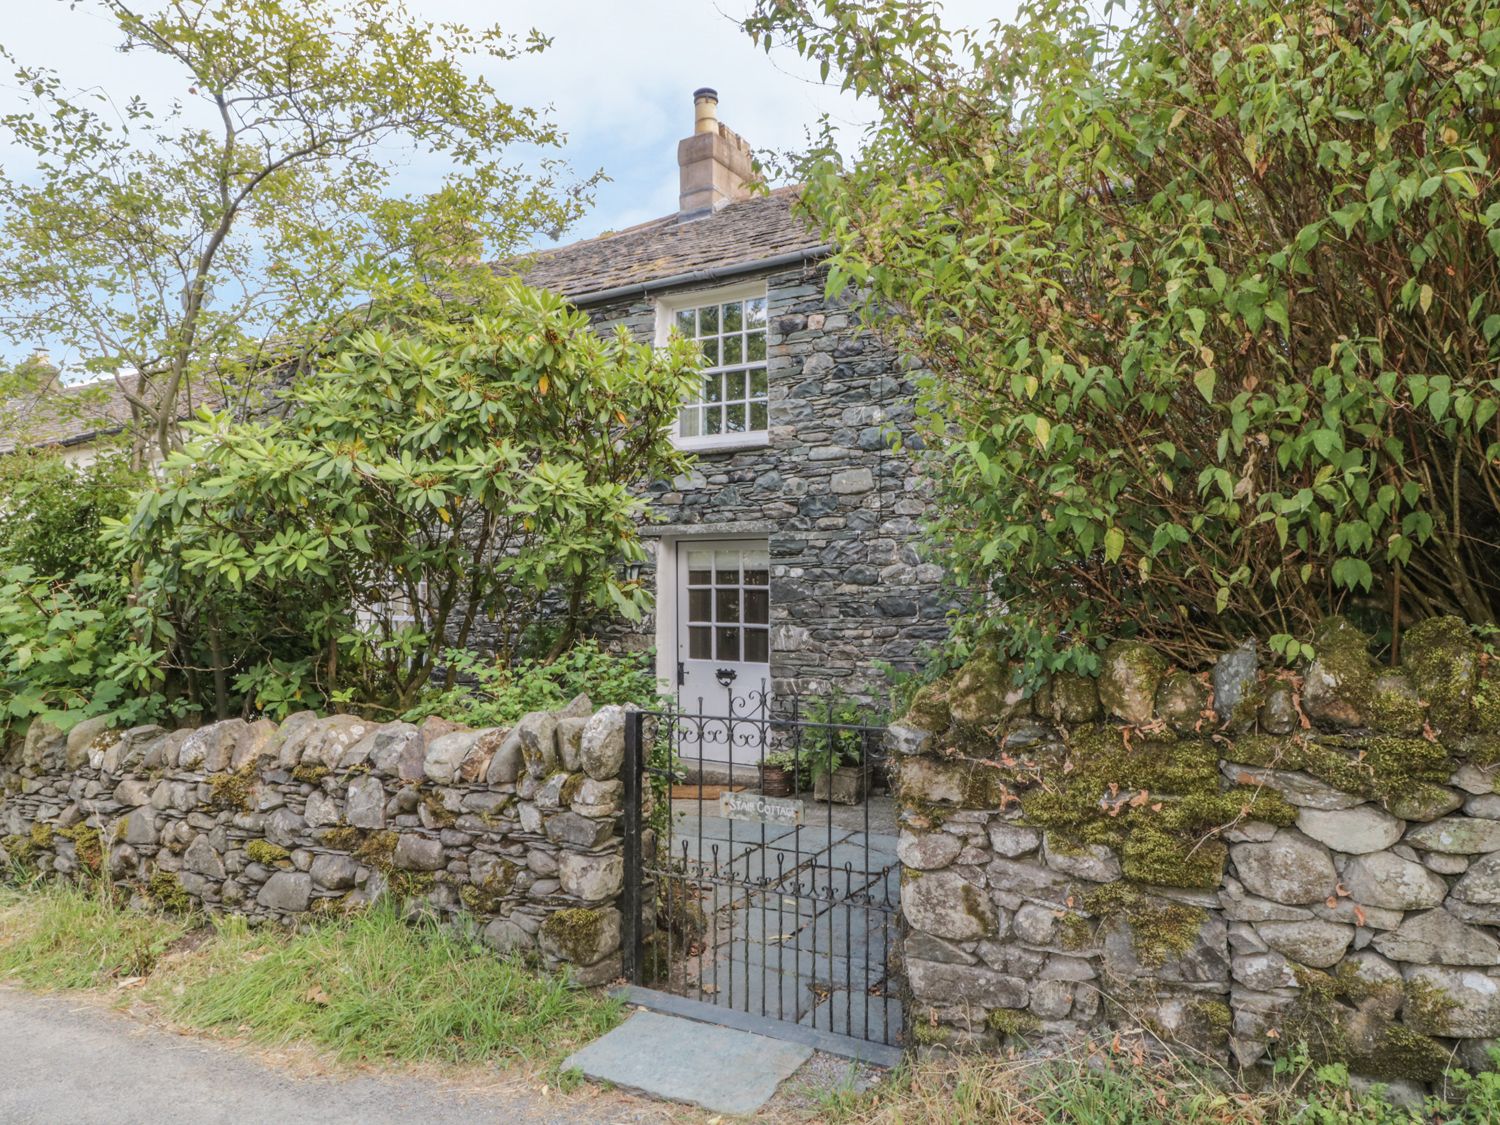 Stair Cottage - Lake District - 972594 - photo 1